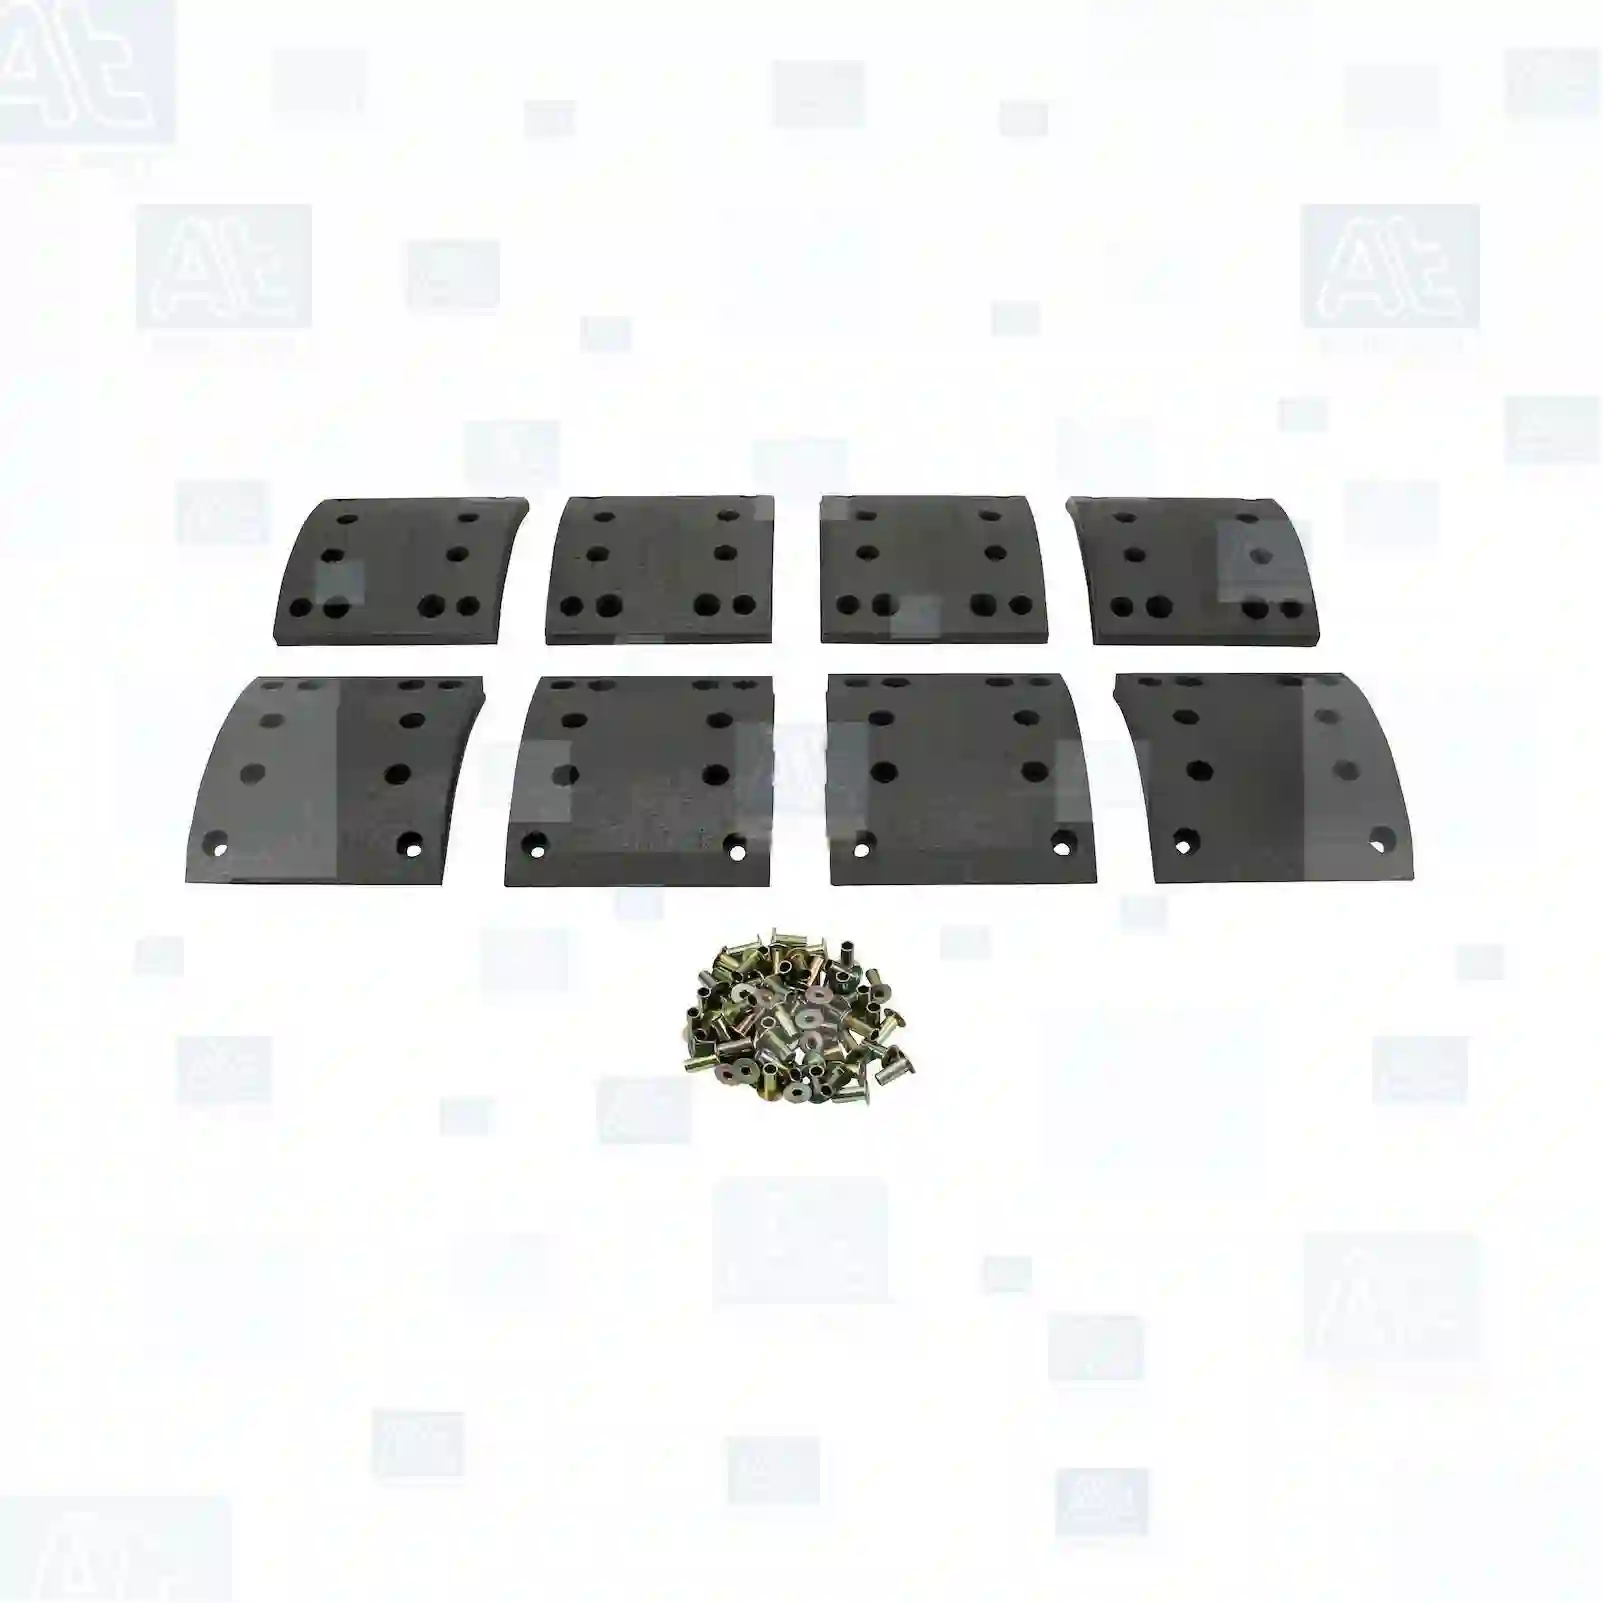 Drum brake lining kit, axle kit - oversize, 77715736, 81502200335, 81502200338, 81502200419, 81502200454, 81502200515, 81502200520, 81502200545, 81502200607, 81502200631, 81502200643, 81502200652, 81502200685, 81502200702, 81502200704, 81502200706, 81502200708, 81502200710, 81502200762, 81502200997, 81502210163, 81502210216, 81502210417, 81502210437, 81502210522, 81502210841, 81502210945, 81502216087, 81502216095, 88502200037, 3054210110, 3464230410, 3464231310, 3464231610, 3464233210, 3464233810, 3464235910, 3464236210, 3604230510, 3604230810, 3604232010, 3814232310, 3854210110, 3854210410, 3854210810, 3854231610, 6174230911, 6174231930, 6174232111, 6174233210, 6174234910, 6174234911, 6174236910, 6174238910, 6214210210, 6214210610, 6214211010, 6524231010 ||  77715736 At Spare Part | Engine, Accelerator Pedal, Camshaft, Connecting Rod, Crankcase, Crankshaft, Cylinder Head, Engine Suspension Mountings, Exhaust Manifold, Exhaust Gas Recirculation, Filter Kits, Flywheel Housing, General Overhaul Kits, Engine, Intake Manifold, Oil Cleaner, Oil Cooler, Oil Filter, Oil Pump, Oil Sump, Piston & Liner, Sensor & Switch, Timing Case, Turbocharger, Cooling System, Belt Tensioner, Coolant Filter, Coolant Pipe, Corrosion Prevention Agent, Drive, Expansion Tank, Fan, Intercooler, Monitors & Gauges, Radiator, Thermostat, V-Belt / Timing belt, Water Pump, Fuel System, Electronical Injector Unit, Feed Pump, Fuel Filter, cpl., Fuel Gauge Sender,  Fuel Line, Fuel Pump, Fuel Tank, Injection Line Kit, Injection Pump, Exhaust System, Clutch & Pedal, Gearbox, Propeller Shaft, Axles, Brake System, Hubs & Wheels, Suspension, Leaf Spring, Universal Parts / Accessories, Steering, Electrical System, Cabin Drum brake lining kit, axle kit - oversize, 77715736, 81502200335, 81502200338, 81502200419, 81502200454, 81502200515, 81502200520, 81502200545, 81502200607, 81502200631, 81502200643, 81502200652, 81502200685, 81502200702, 81502200704, 81502200706, 81502200708, 81502200710, 81502200762, 81502200997, 81502210163, 81502210216, 81502210417, 81502210437, 81502210522, 81502210841, 81502210945, 81502216087, 81502216095, 88502200037, 3054210110, 3464230410, 3464231310, 3464231610, 3464233210, 3464233810, 3464235910, 3464236210, 3604230510, 3604230810, 3604232010, 3814232310, 3854210110, 3854210410, 3854210810, 3854231610, 6174230911, 6174231930, 6174232111, 6174233210, 6174234910, 6174234911, 6174236910, 6174238910, 6214210210, 6214210610, 6214211010, 6524231010 ||  77715736 At Spare Part | Engine, Accelerator Pedal, Camshaft, Connecting Rod, Crankcase, Crankshaft, Cylinder Head, Engine Suspension Mountings, Exhaust Manifold, Exhaust Gas Recirculation, Filter Kits, Flywheel Housing, General Overhaul Kits, Engine, Intake Manifold, Oil Cleaner, Oil Cooler, Oil Filter, Oil Pump, Oil Sump, Piston & Liner, Sensor & Switch, Timing Case, Turbocharger, Cooling System, Belt Tensioner, Coolant Filter, Coolant Pipe, Corrosion Prevention Agent, Drive, Expansion Tank, Fan, Intercooler, Monitors & Gauges, Radiator, Thermostat, V-Belt / Timing belt, Water Pump, Fuel System, Electronical Injector Unit, Feed Pump, Fuel Filter, cpl., Fuel Gauge Sender,  Fuel Line, Fuel Pump, Fuel Tank, Injection Line Kit, Injection Pump, Exhaust System, Clutch & Pedal, Gearbox, Propeller Shaft, Axles, Brake System, Hubs & Wheels, Suspension, Leaf Spring, Universal Parts / Accessories, Steering, Electrical System, Cabin